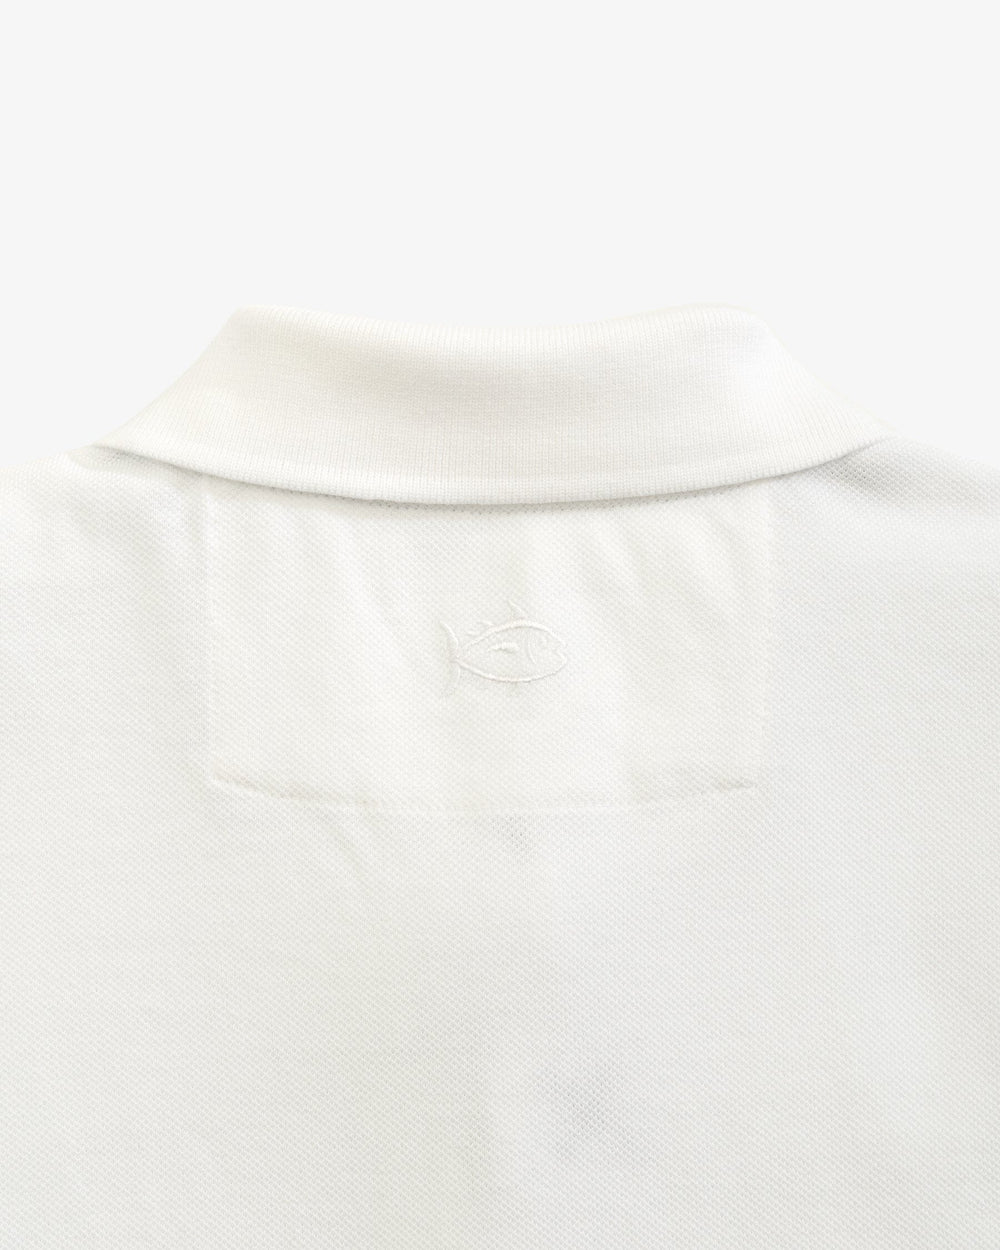 The yoke view of the Georgia Tech Yellow Jackets Skipjack Polo by Southern Tide - Classic White